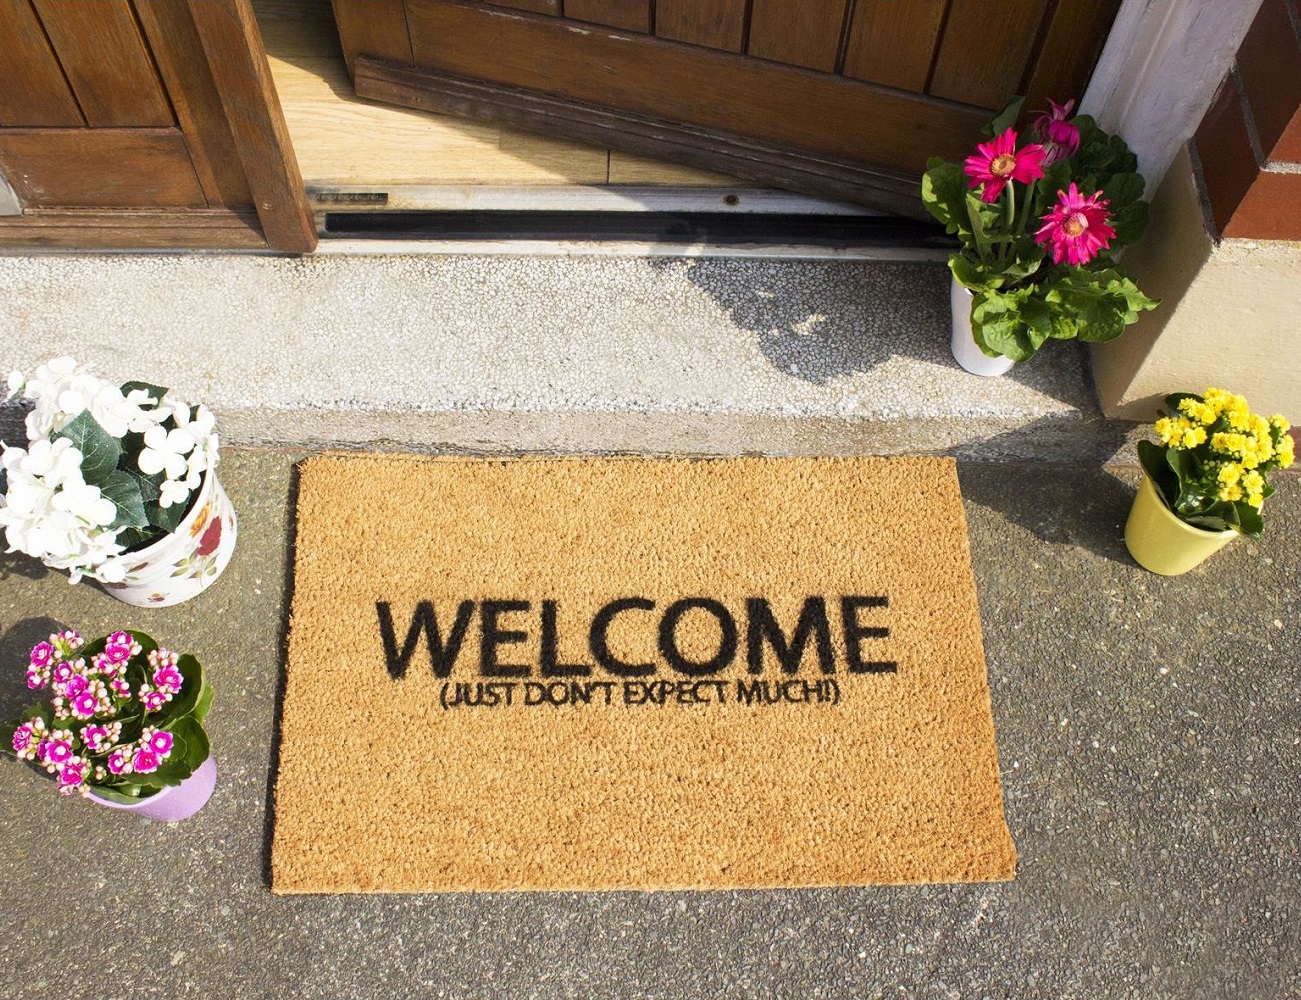 Welcome Just Don’t Expect Much Doormat